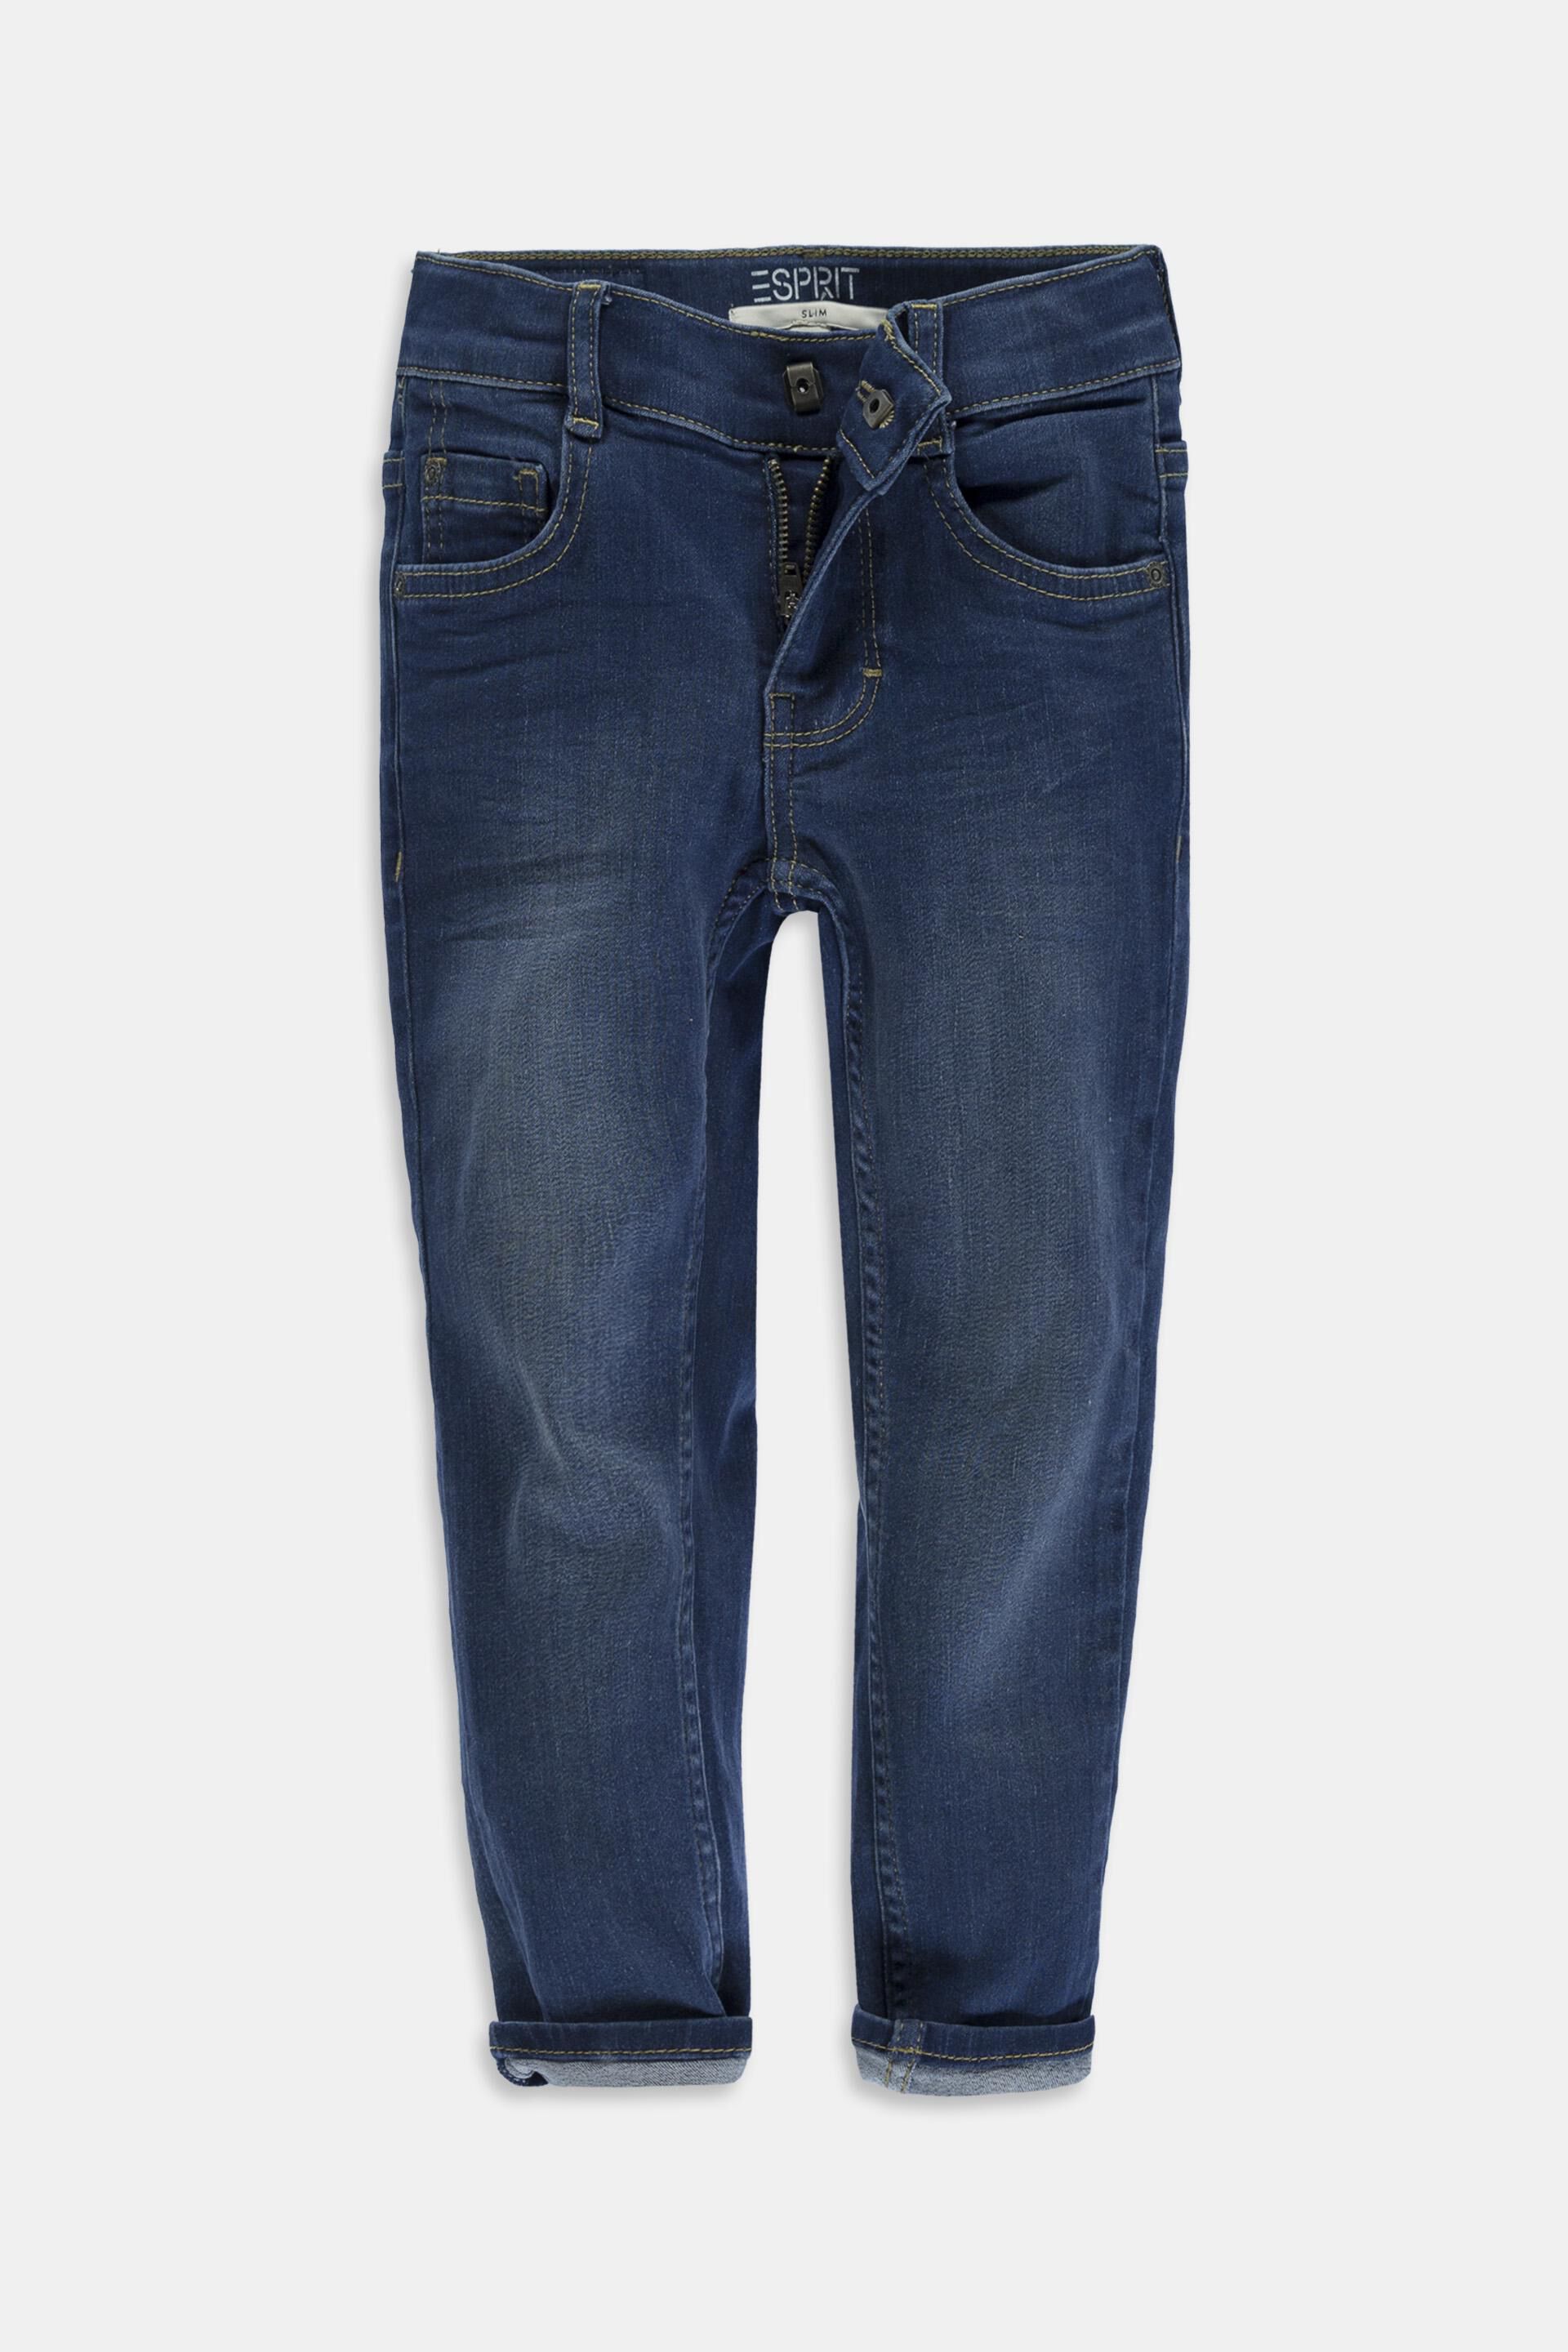 Esprit waistband jeans with an adjustable Washed stretch